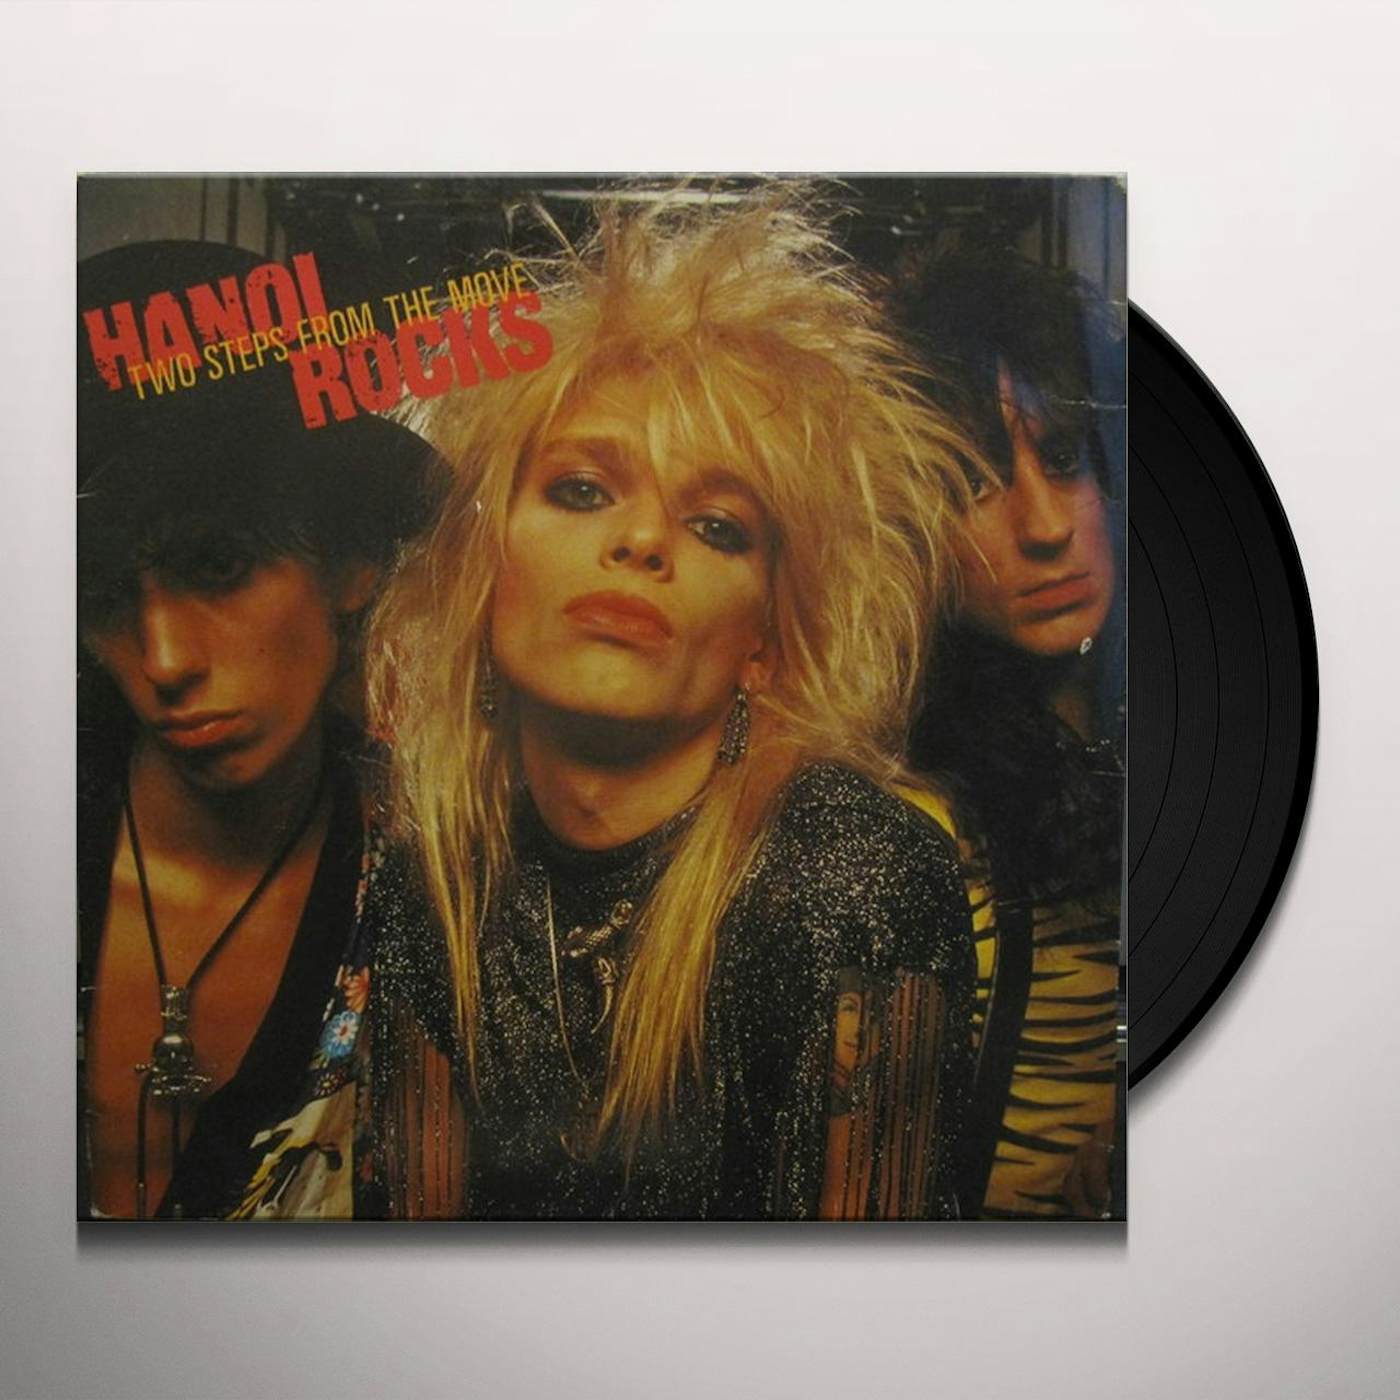 Hanoi Rocks TWO STEPS FROM THE MOVE Vinyl Record